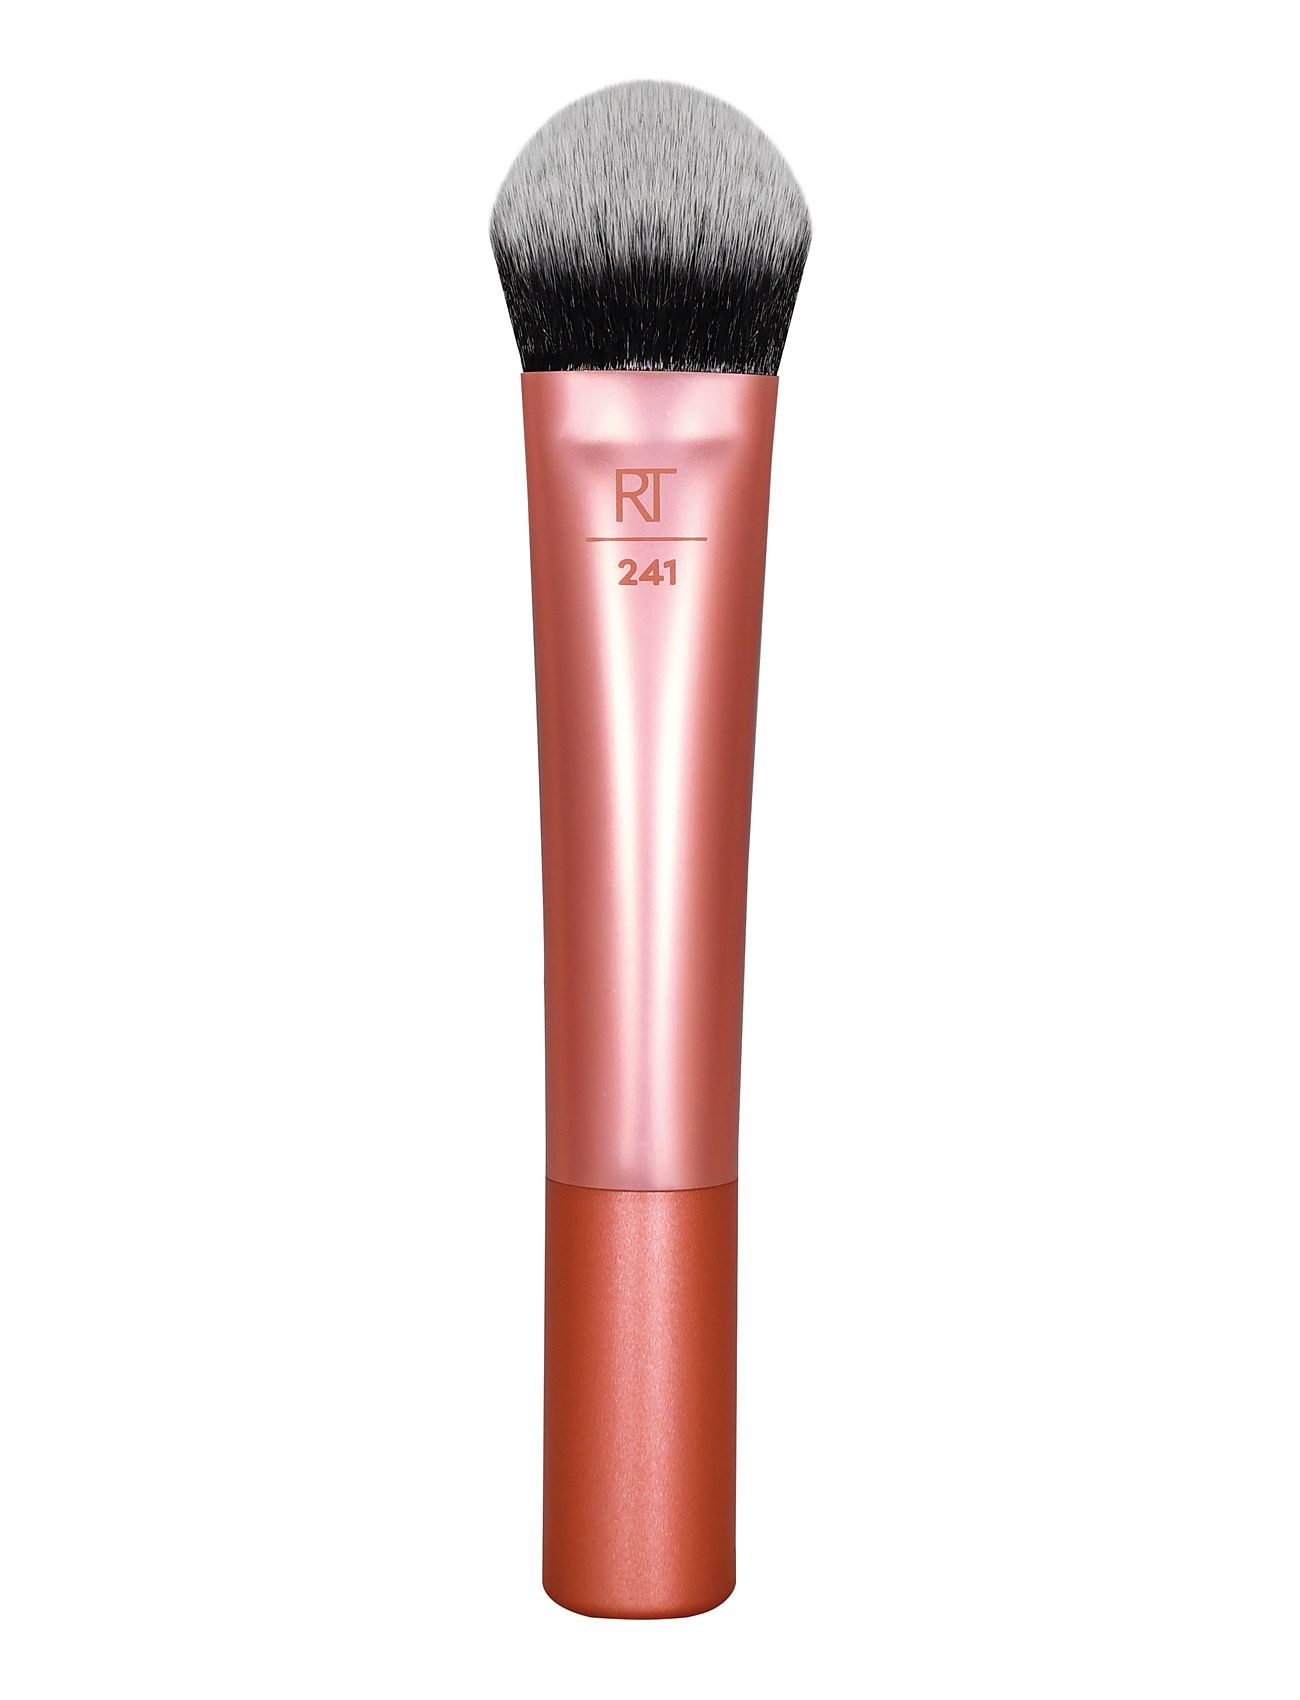 Real Techniques Seamless Complexion Brush Beauty Women Makeup Makeup Brushes Face Brushes Foundation Brushes Real Techniques